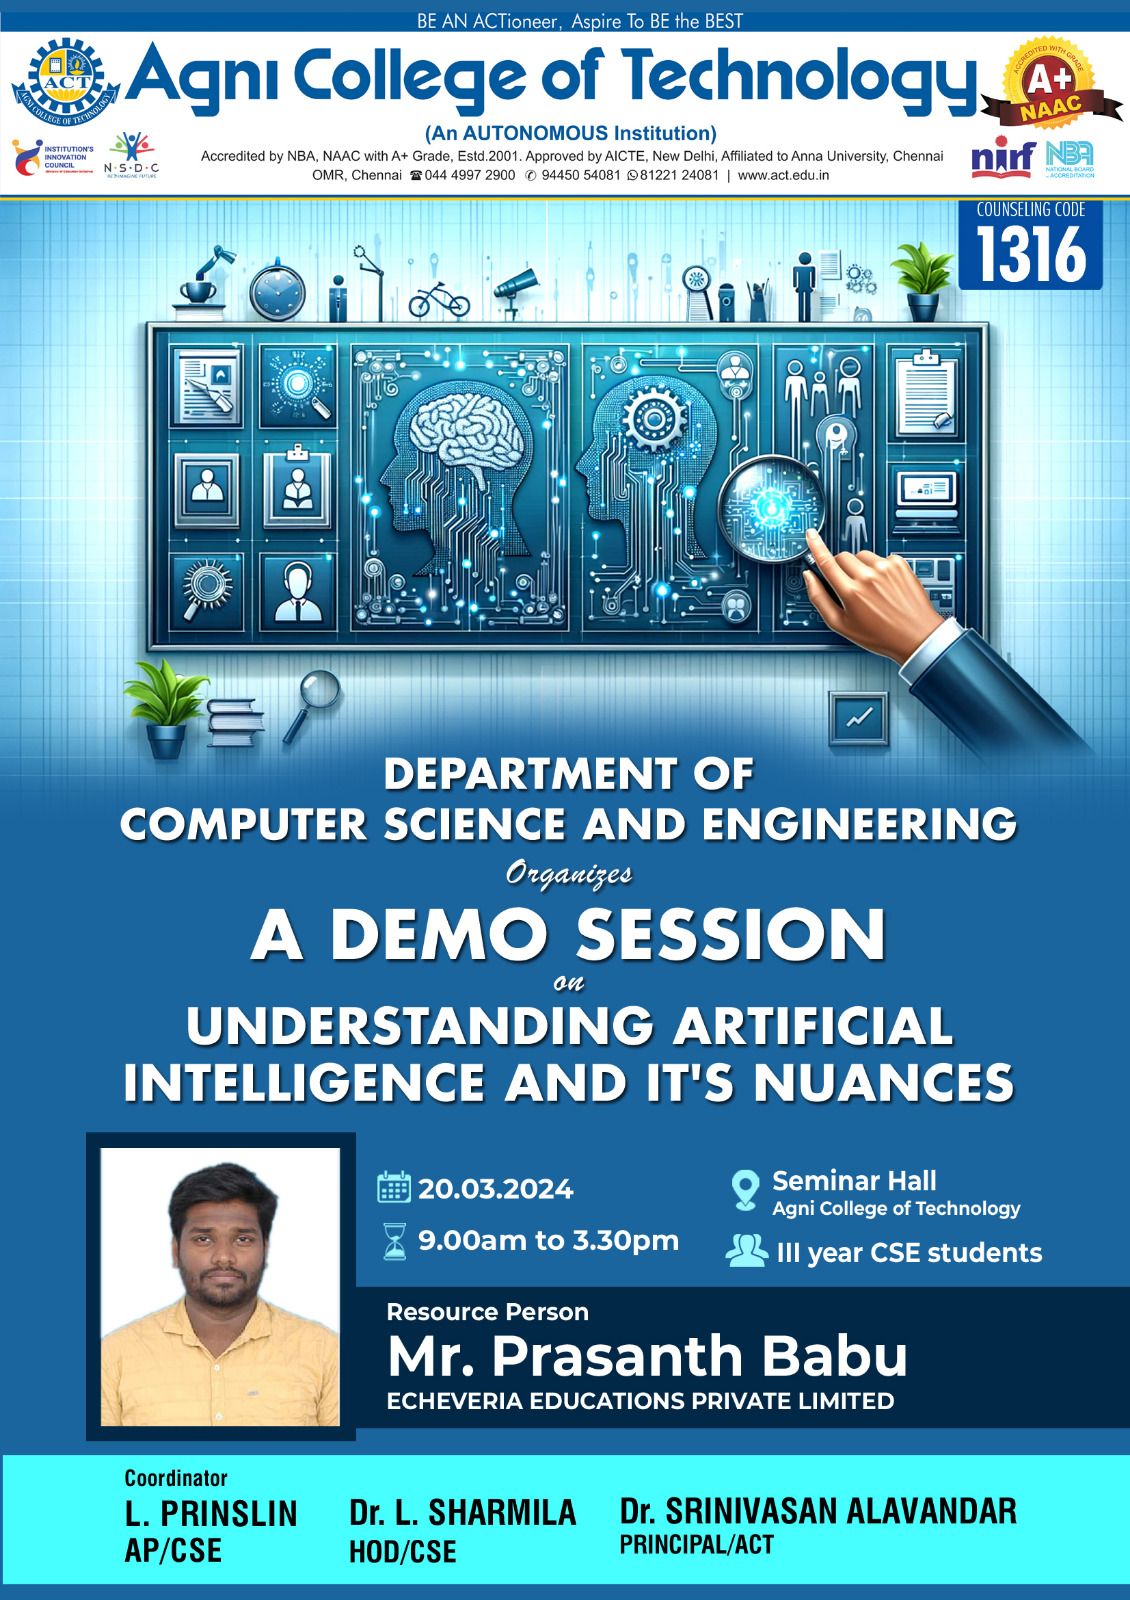 A Demo Session on Understanding Artificial Intelligence and it’s Nuances